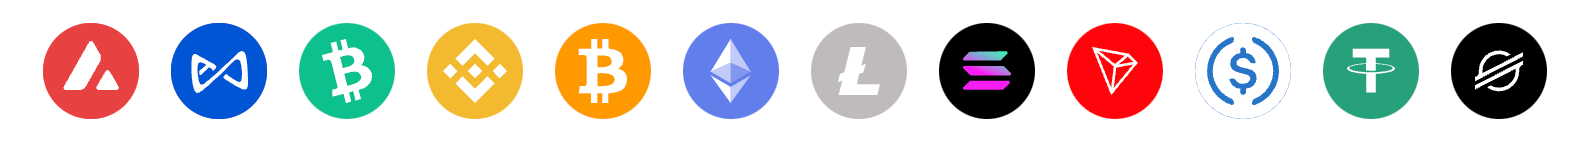 An image of many cryptocurrency logos, including Bitcoin and Ethereum.